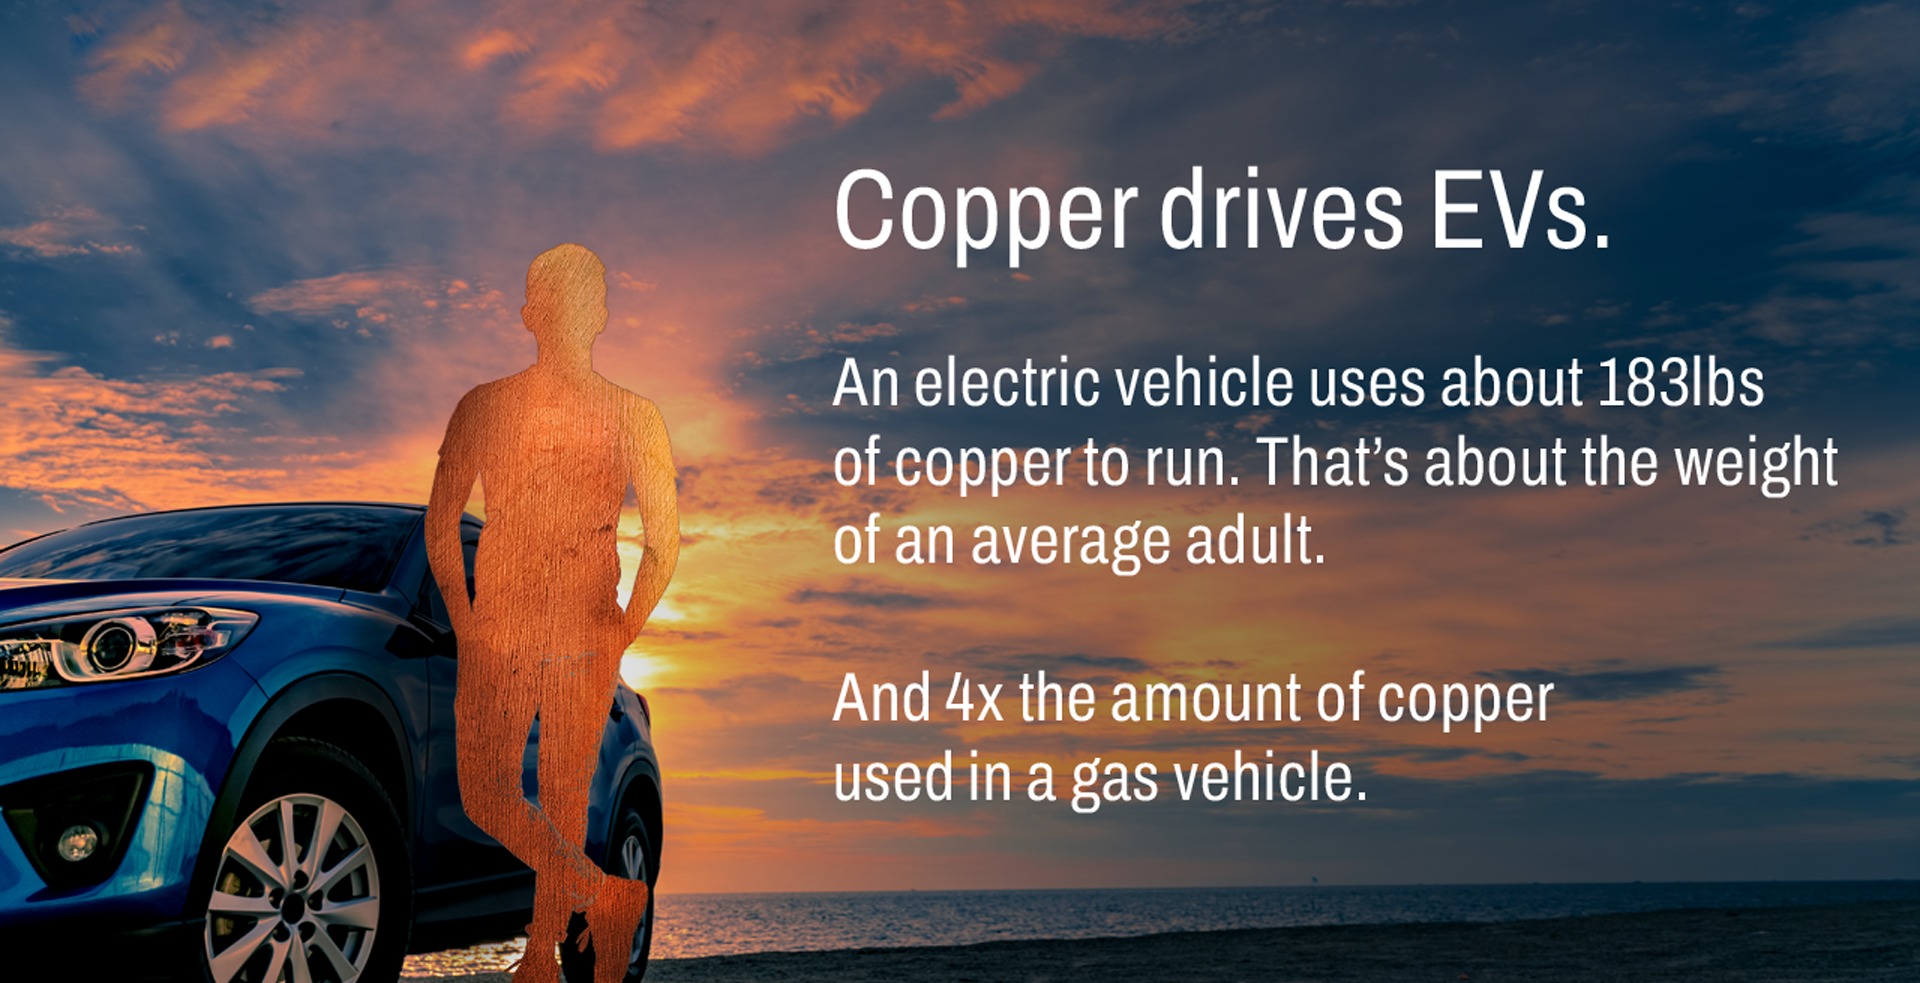 Coppers Drives EVs